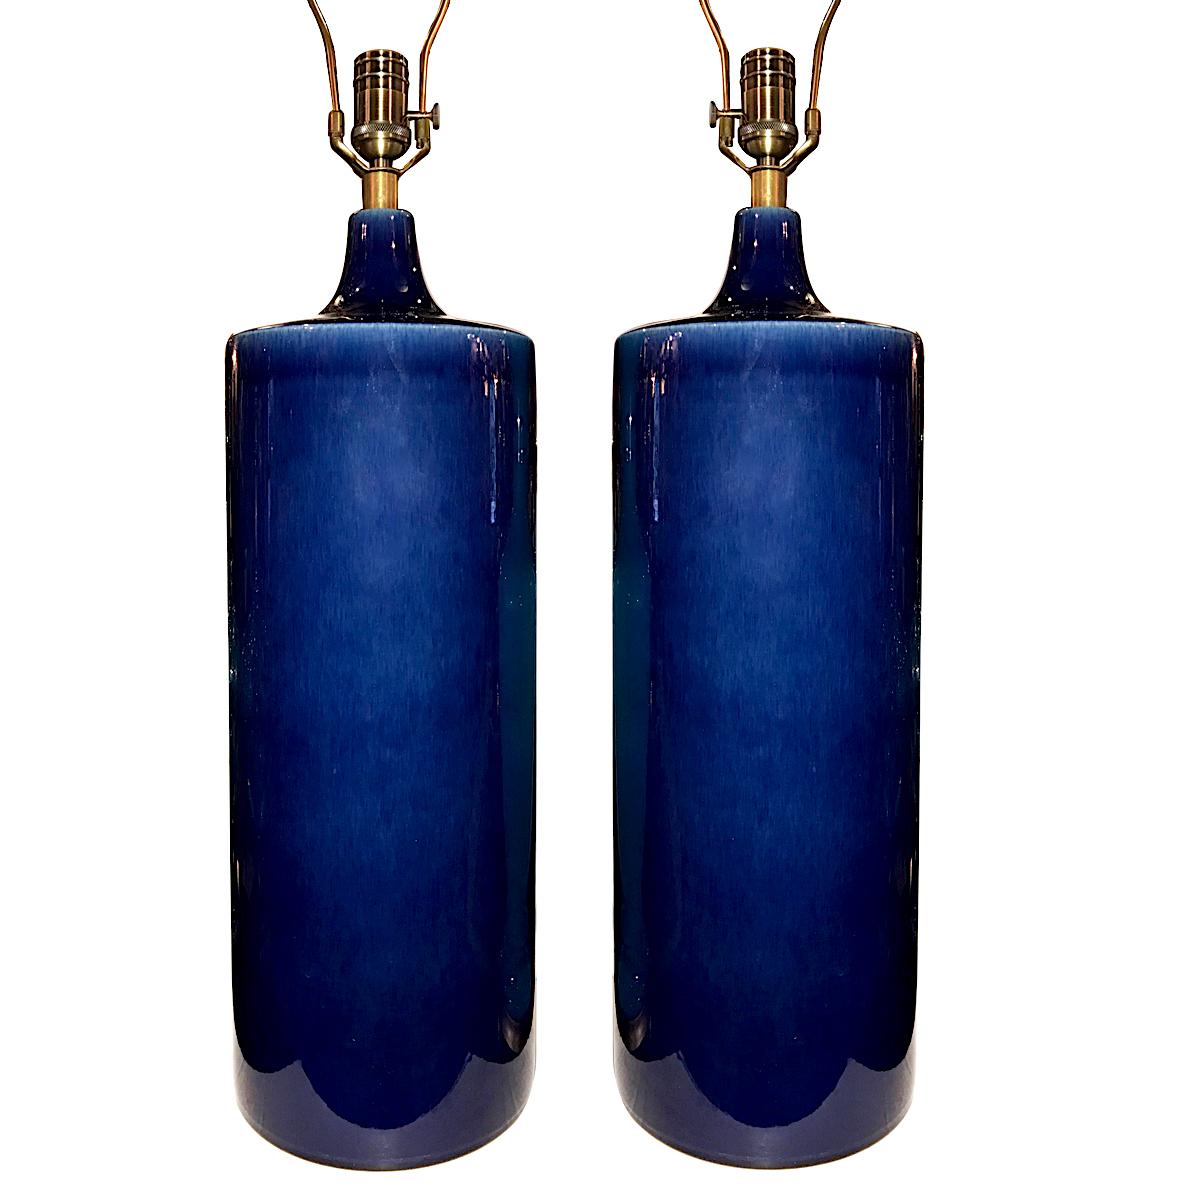 A pair of Italian circa 1960's cobalt blue glazed porcelain table lamps.

Measurements:
Height of body: 22.5